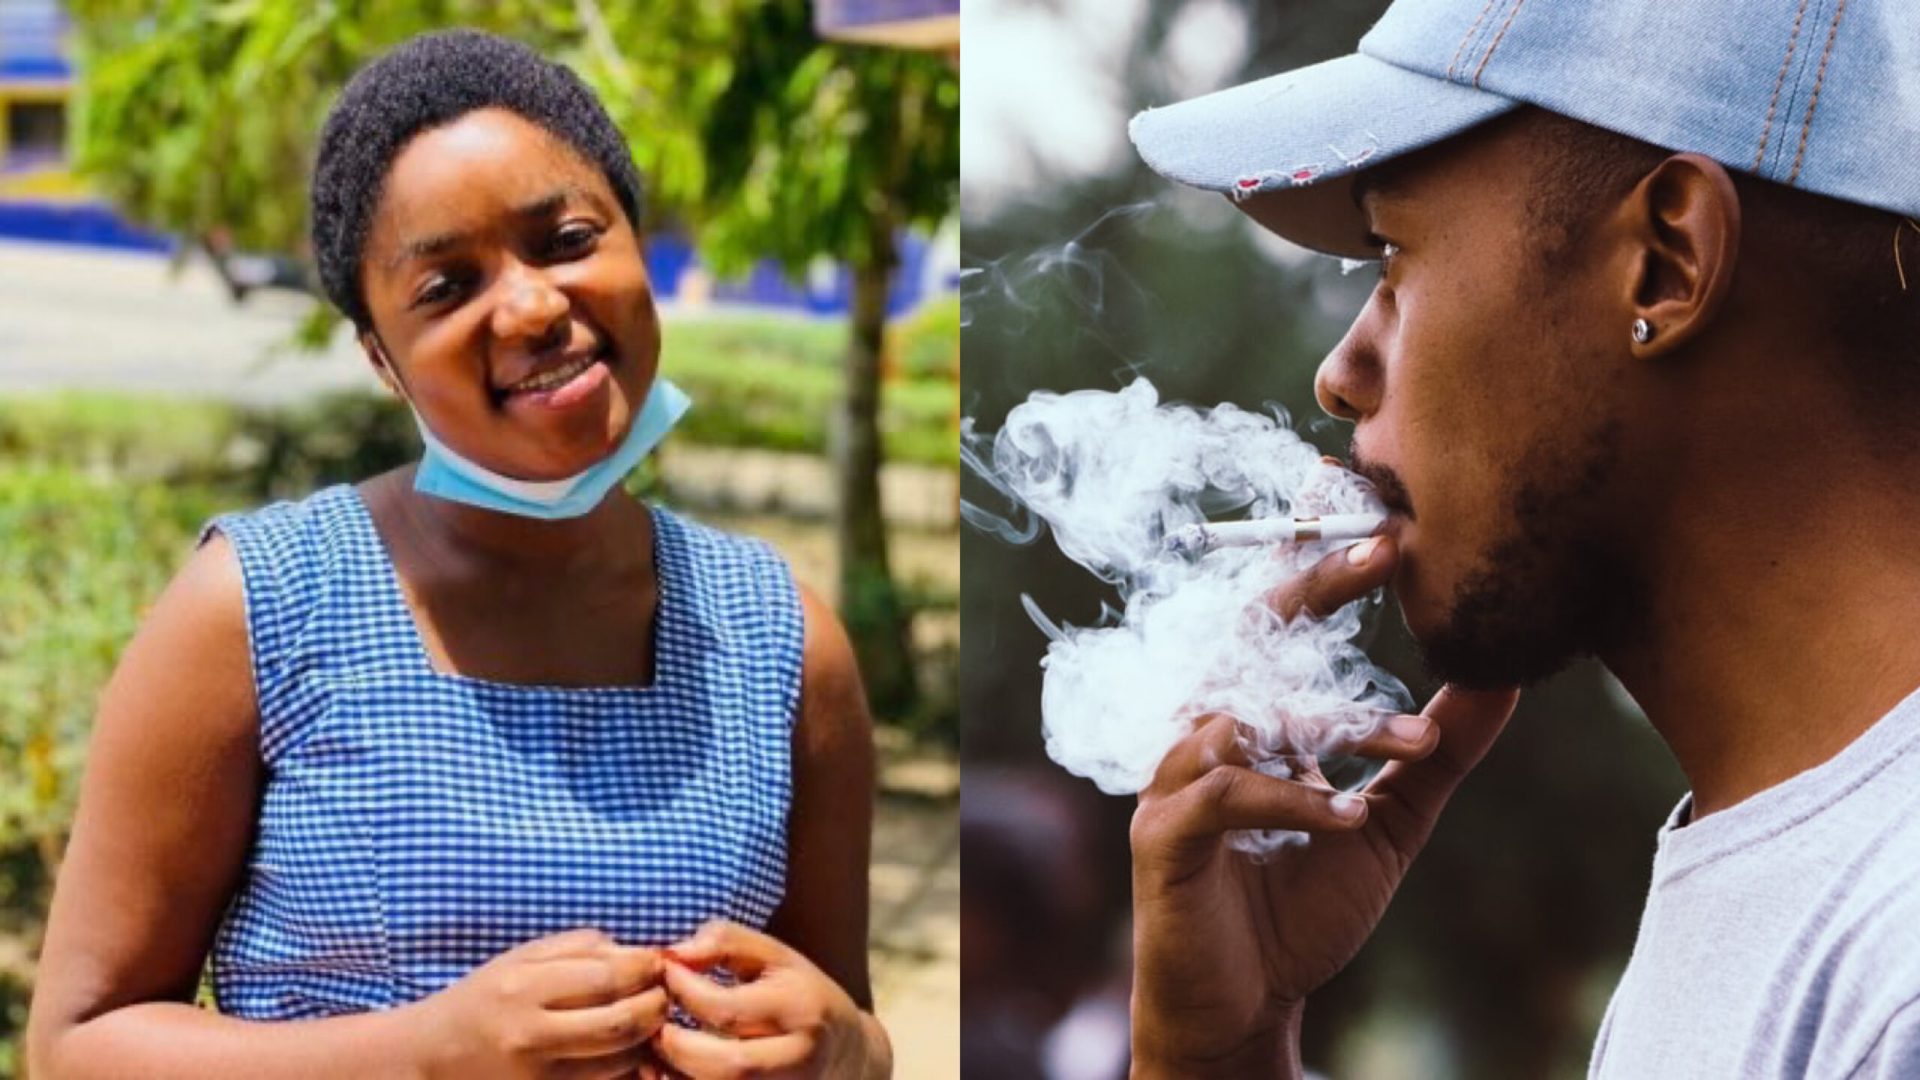 Men 'attack' lady who says she will never date or marry guys who smoke